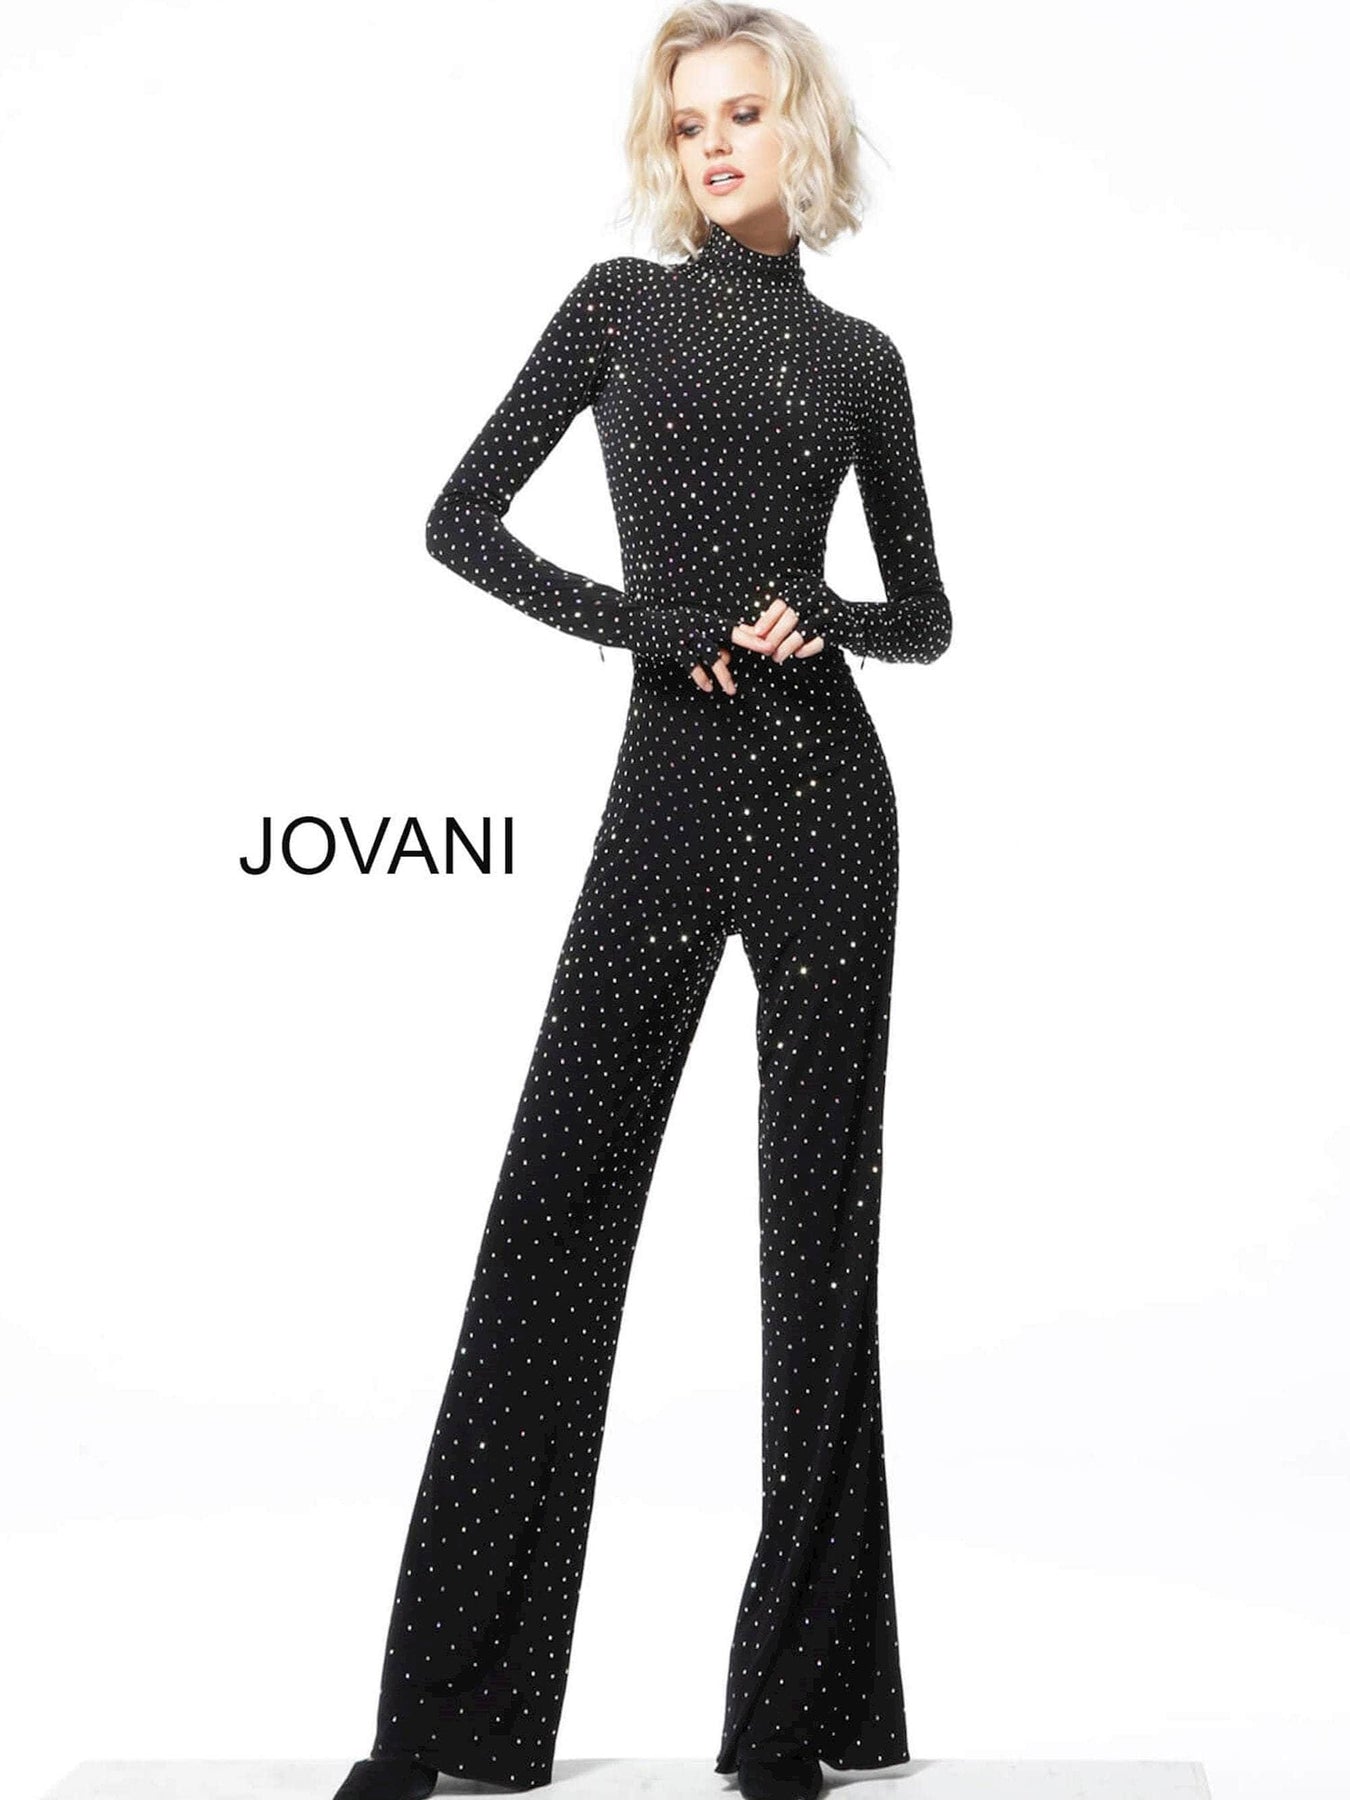 Jovani 3048ASC - High Neck Beaded Jumpsuit Special Occasion Dress 10 